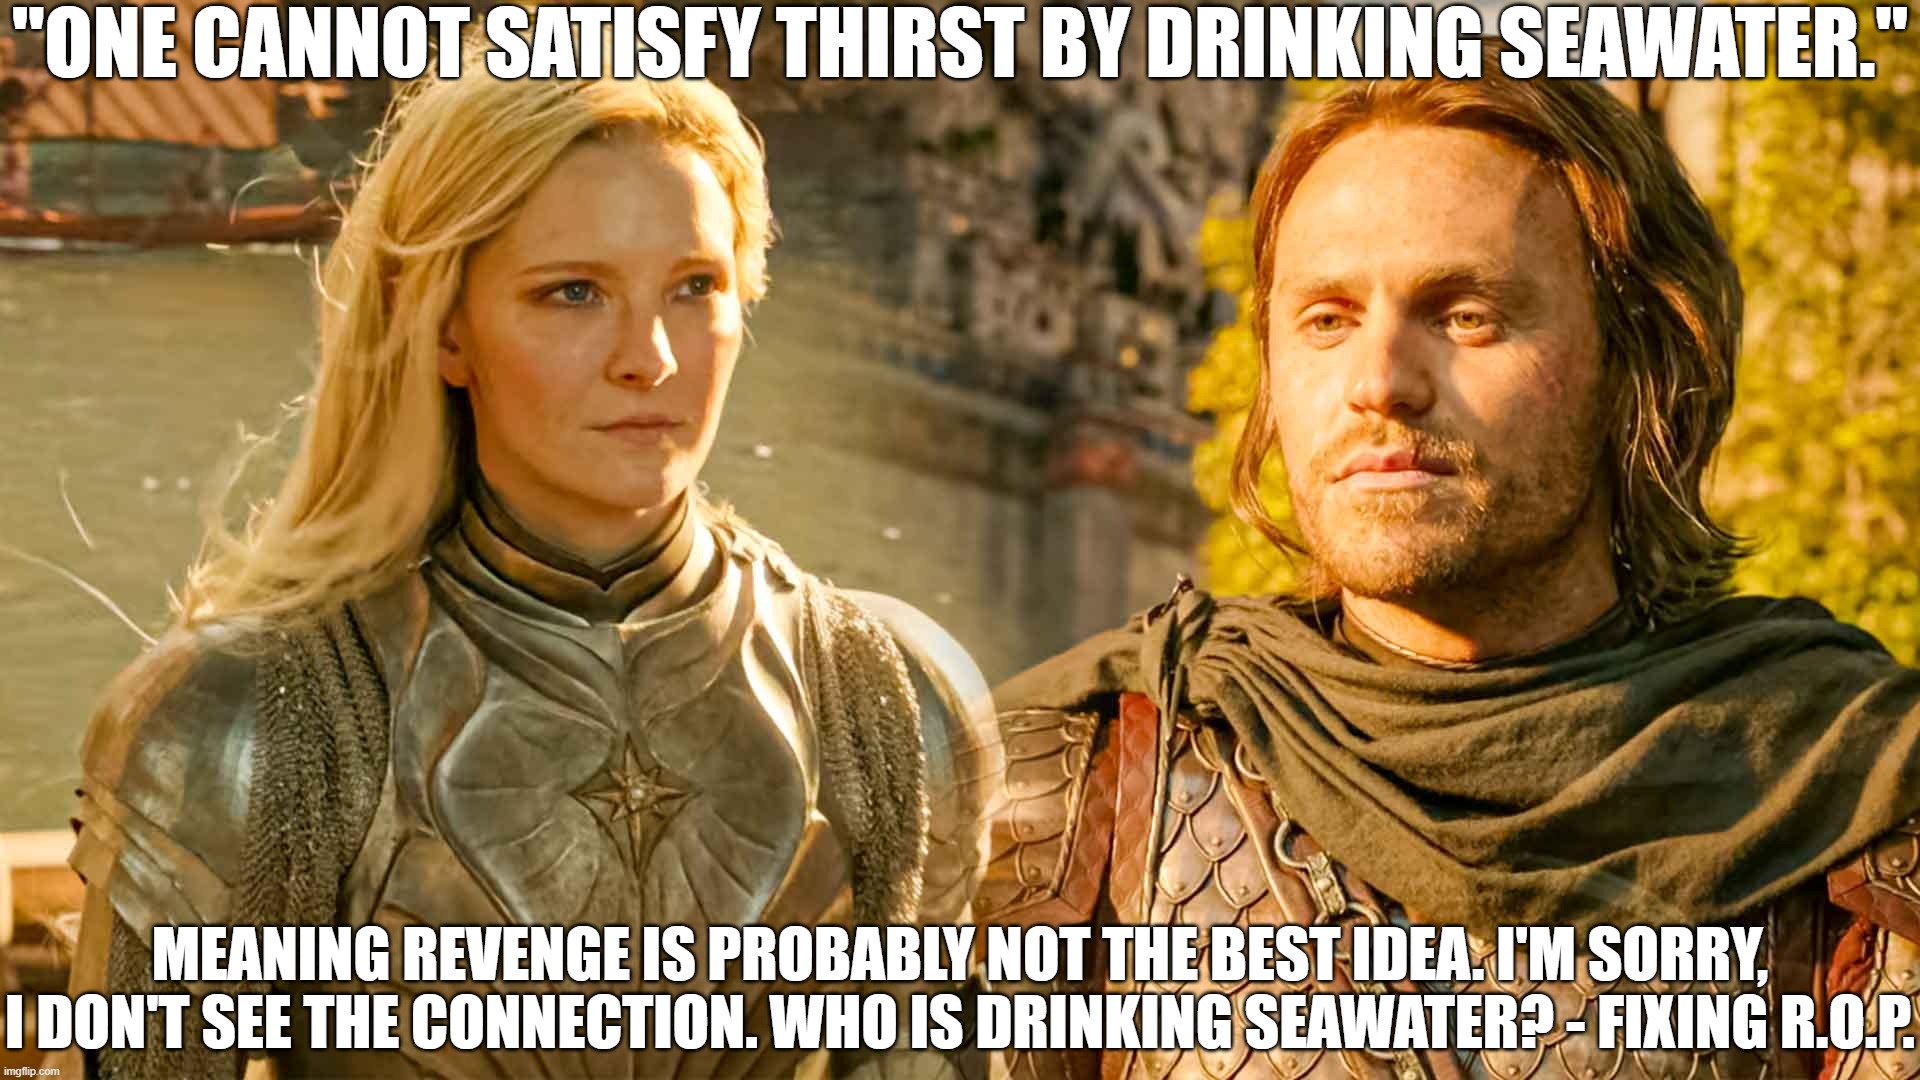 More Bad Sayings in Rings of Power | "ONE CANNOT SATISFY THIRST BY DRINKING SEAWATER."; MEANING REVENGE IS PROBABLY NOT THE BEST IDEA. I'M SORRY, I DON'T SEE THE CONNECTION. WHO IS DRINKING SEAWATER? - FIXING R.O.P. | image tagged in bad writing,rings of power,nonsense | made w/ Imgflip meme maker